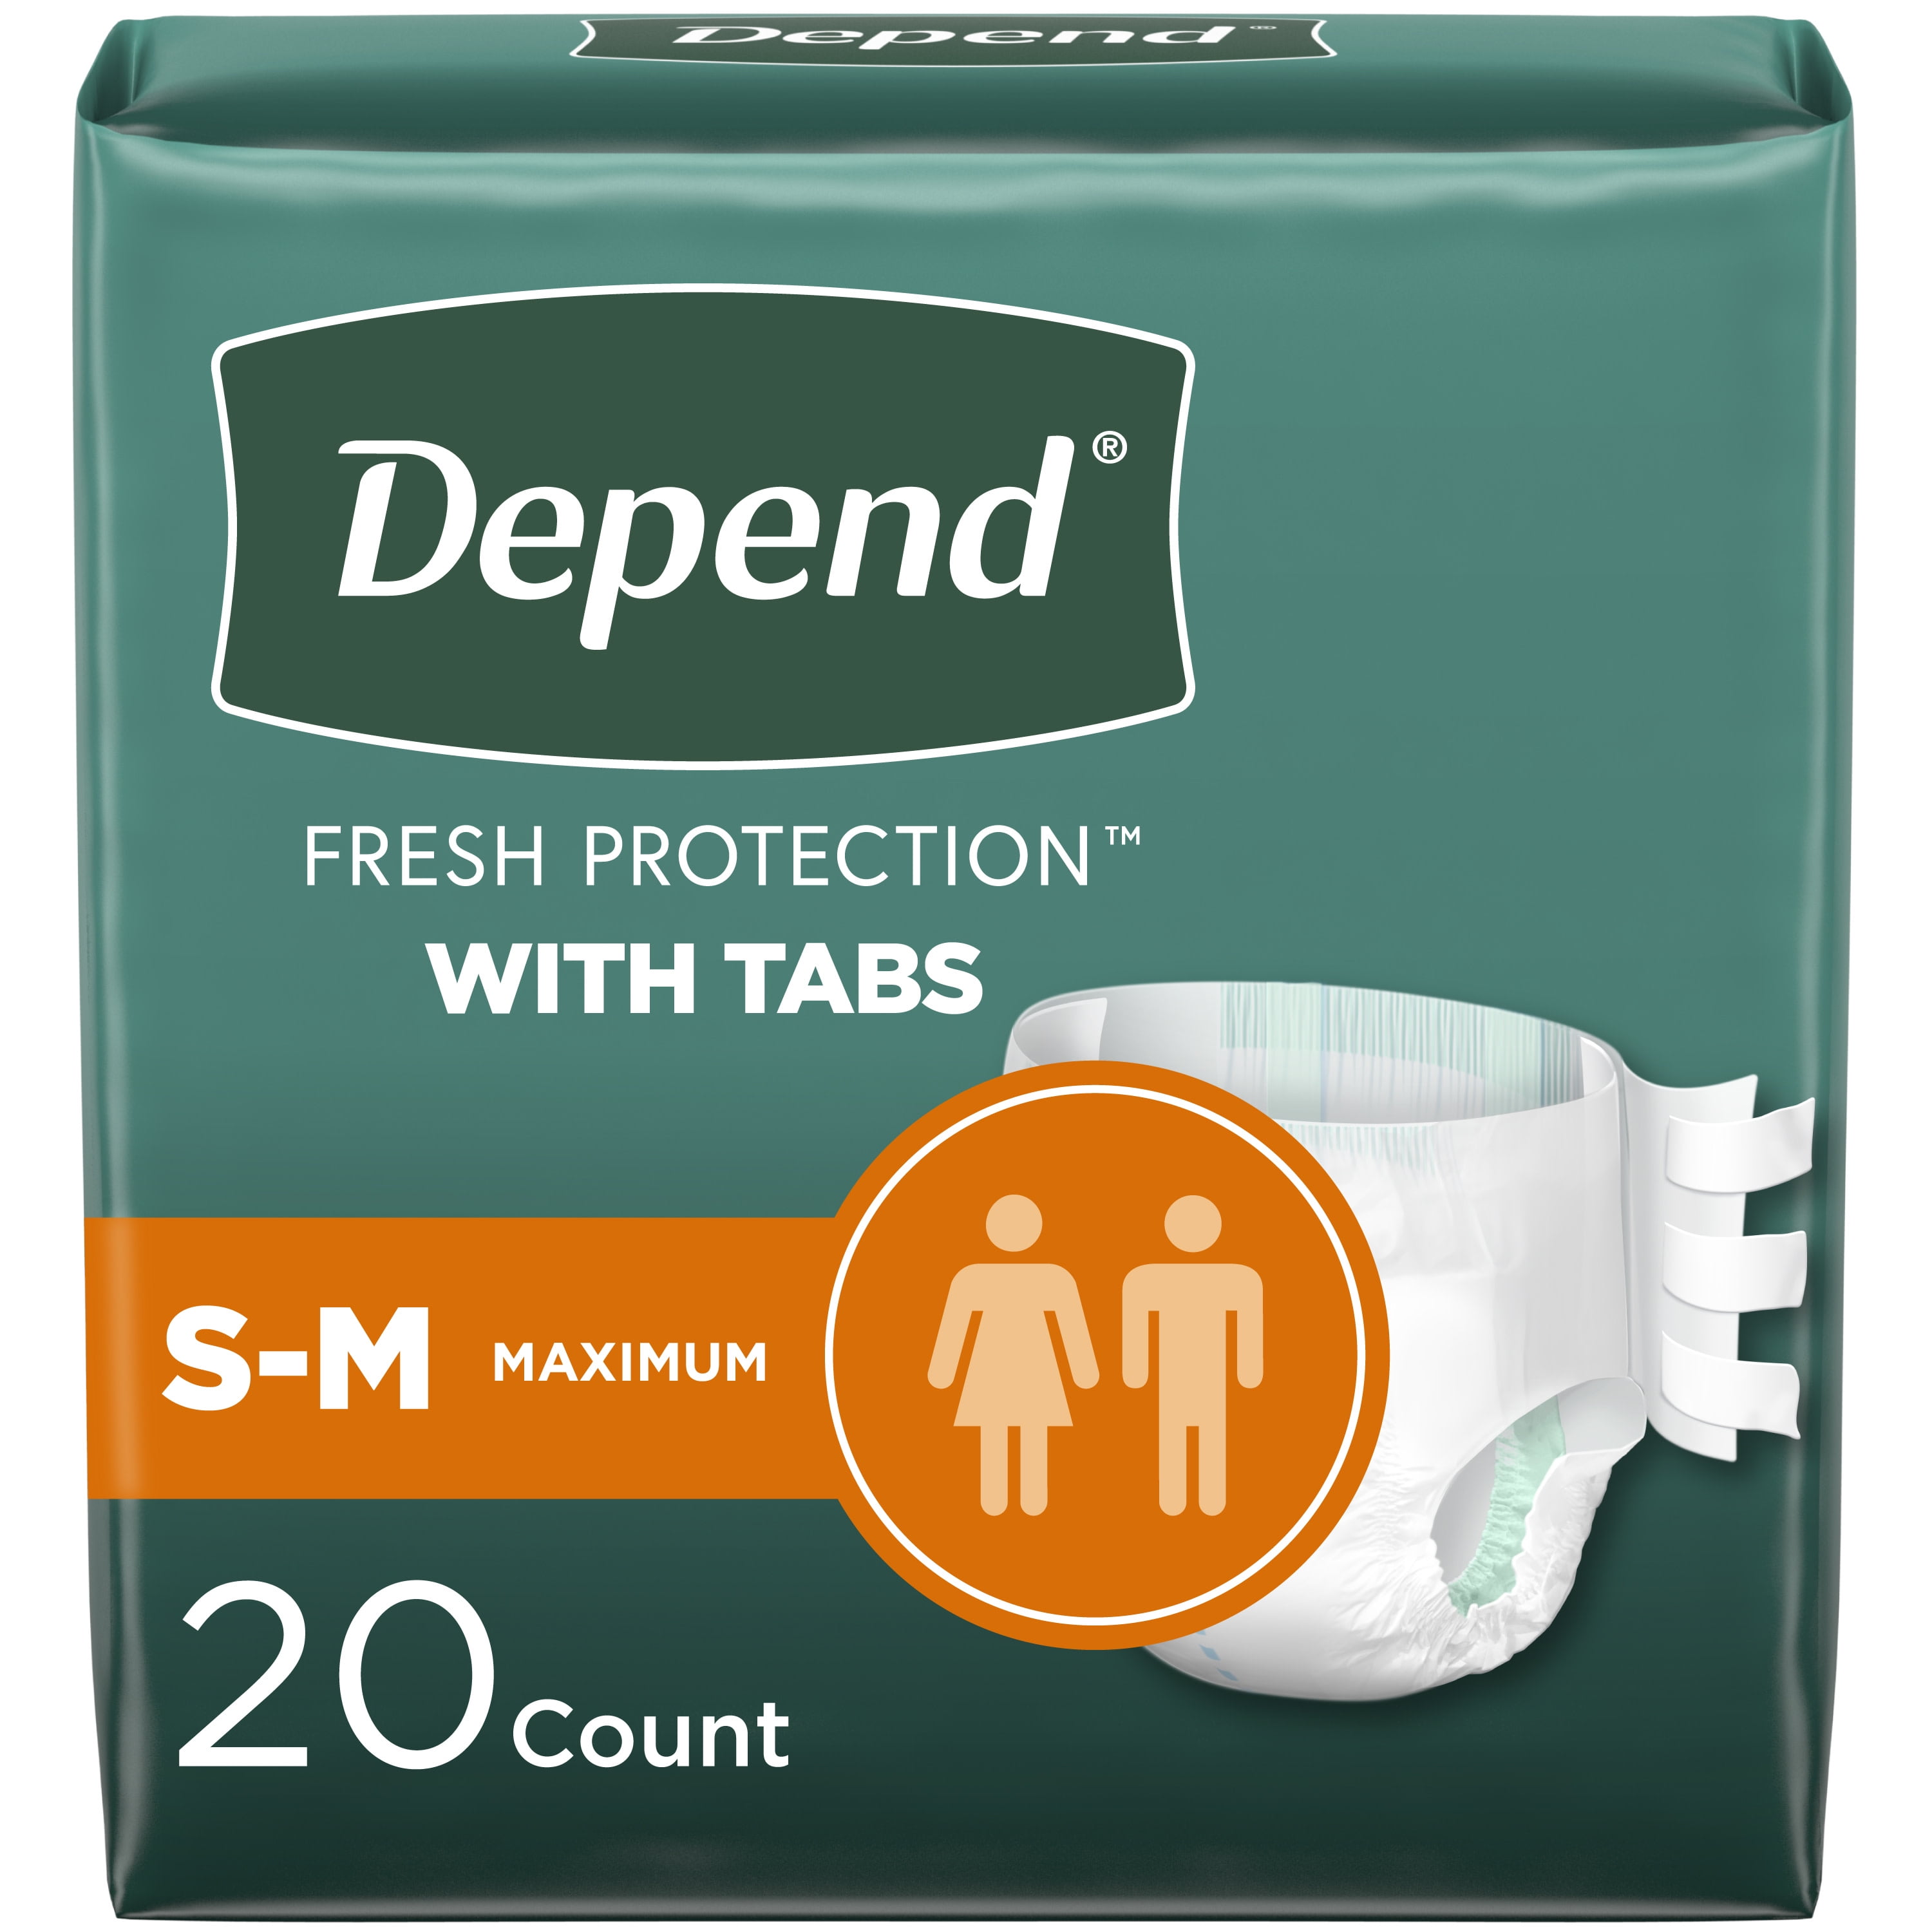 Depend Incontinence Protection with Tabs, Unisex, Large (35–49 Waist, over  170 lbs), Maximum Absorbency, 16ct 